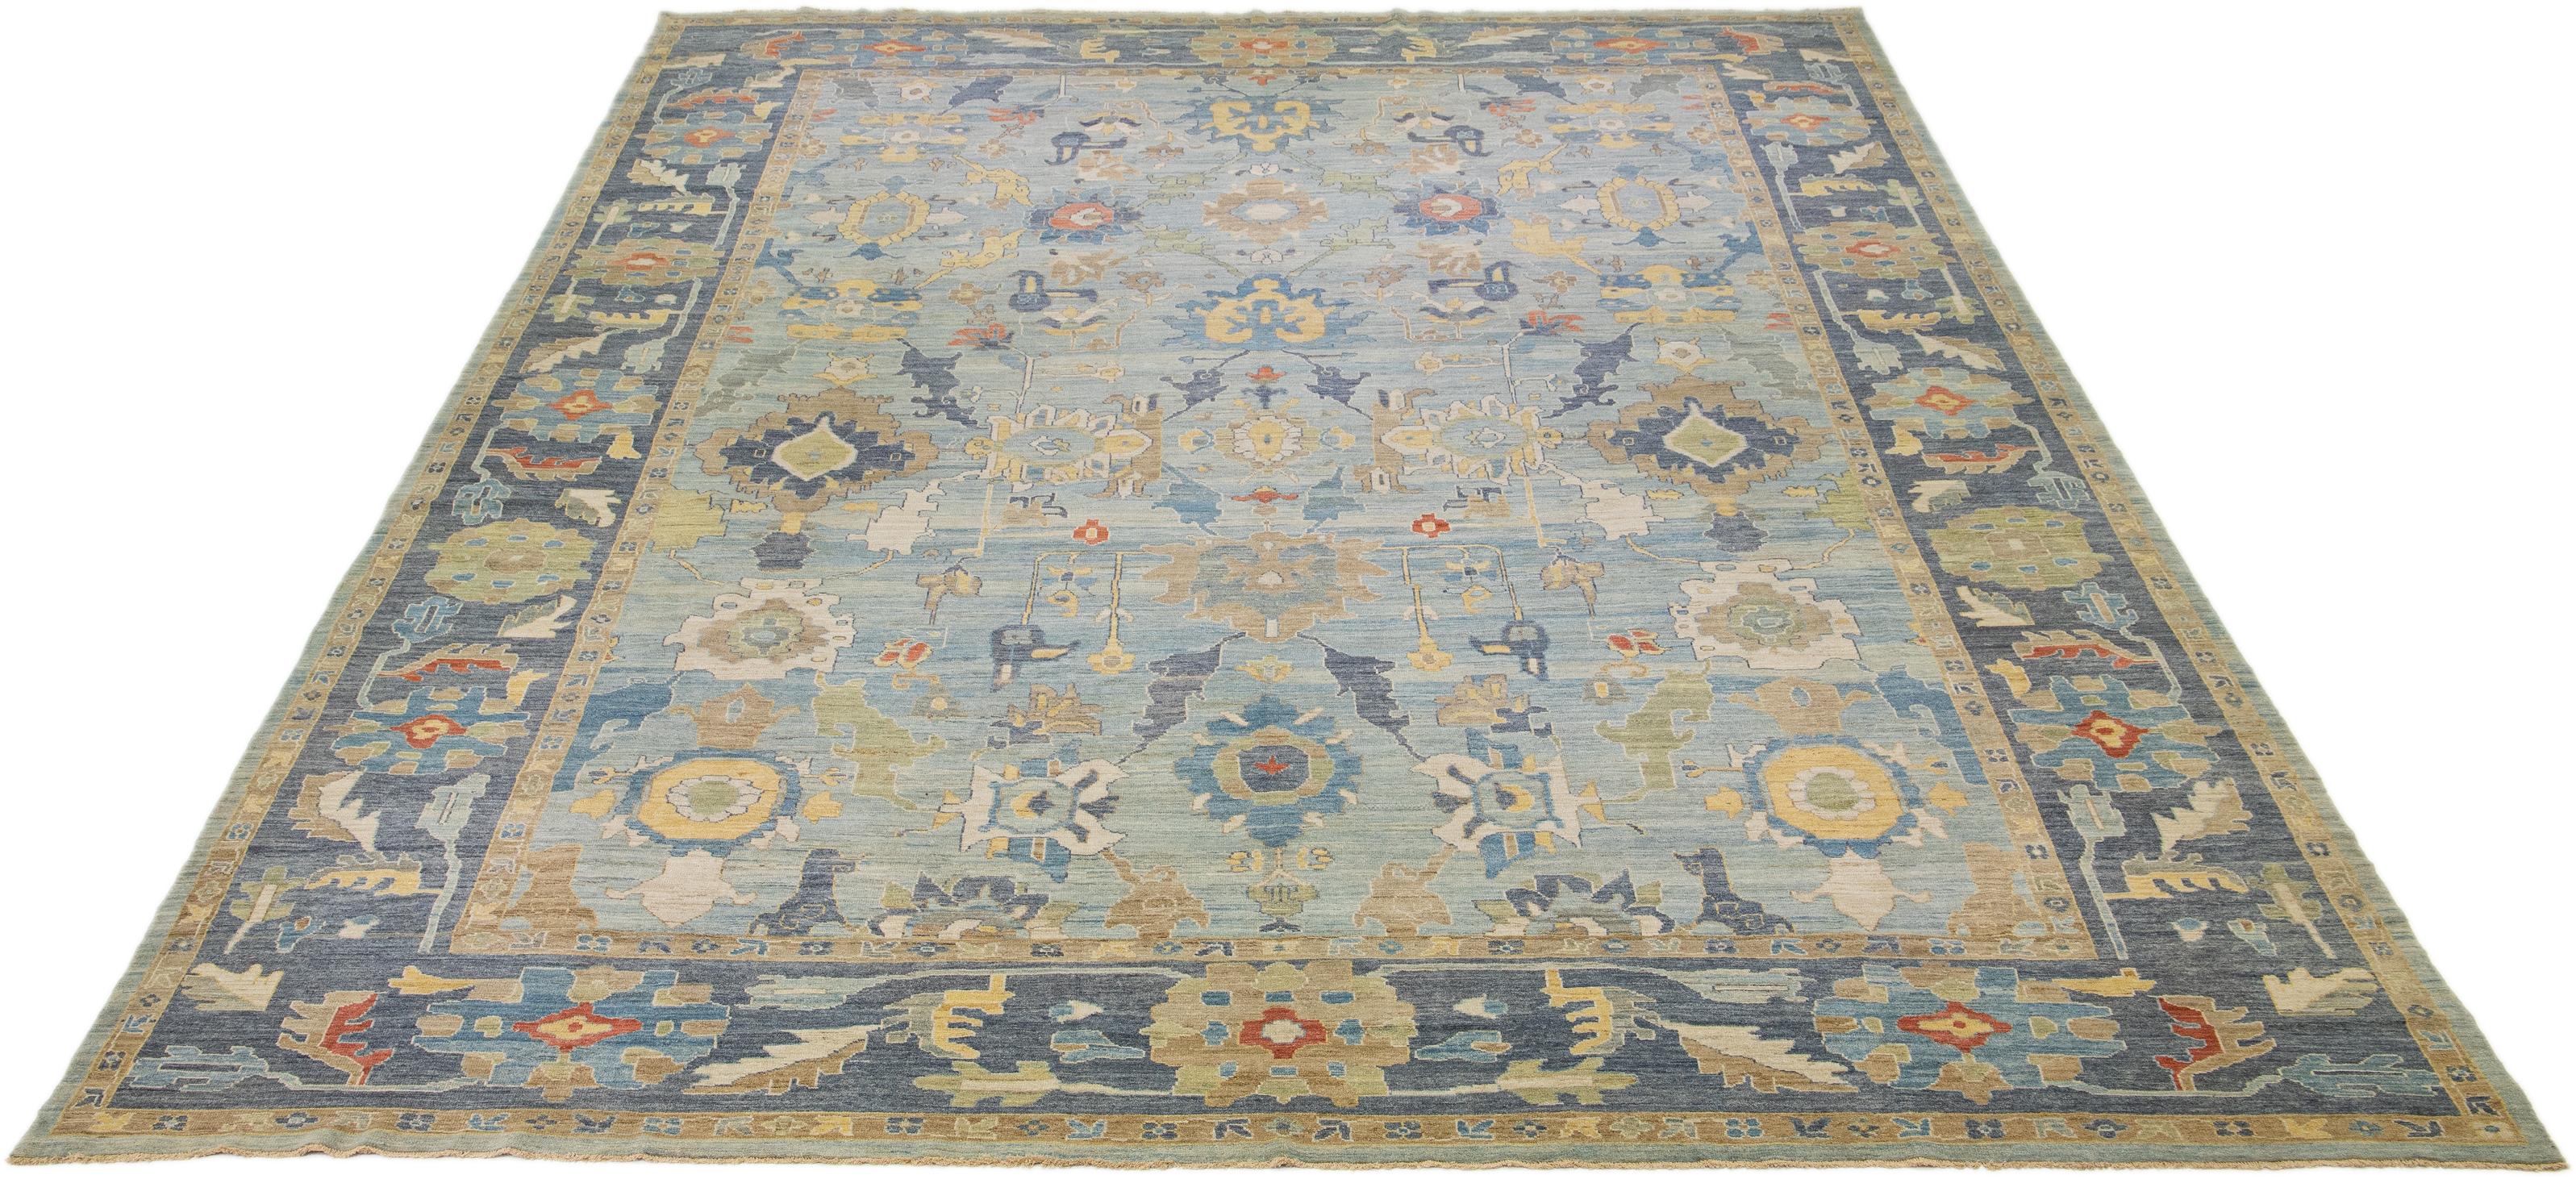 This modern reinterpretation of timeless Sultanabad design is beautifully manifested in an exquisitely hand-knotted wool rug, resplendent in its striking light blue shade. An intricate navy blue border delineates its all-over floral embroidery,